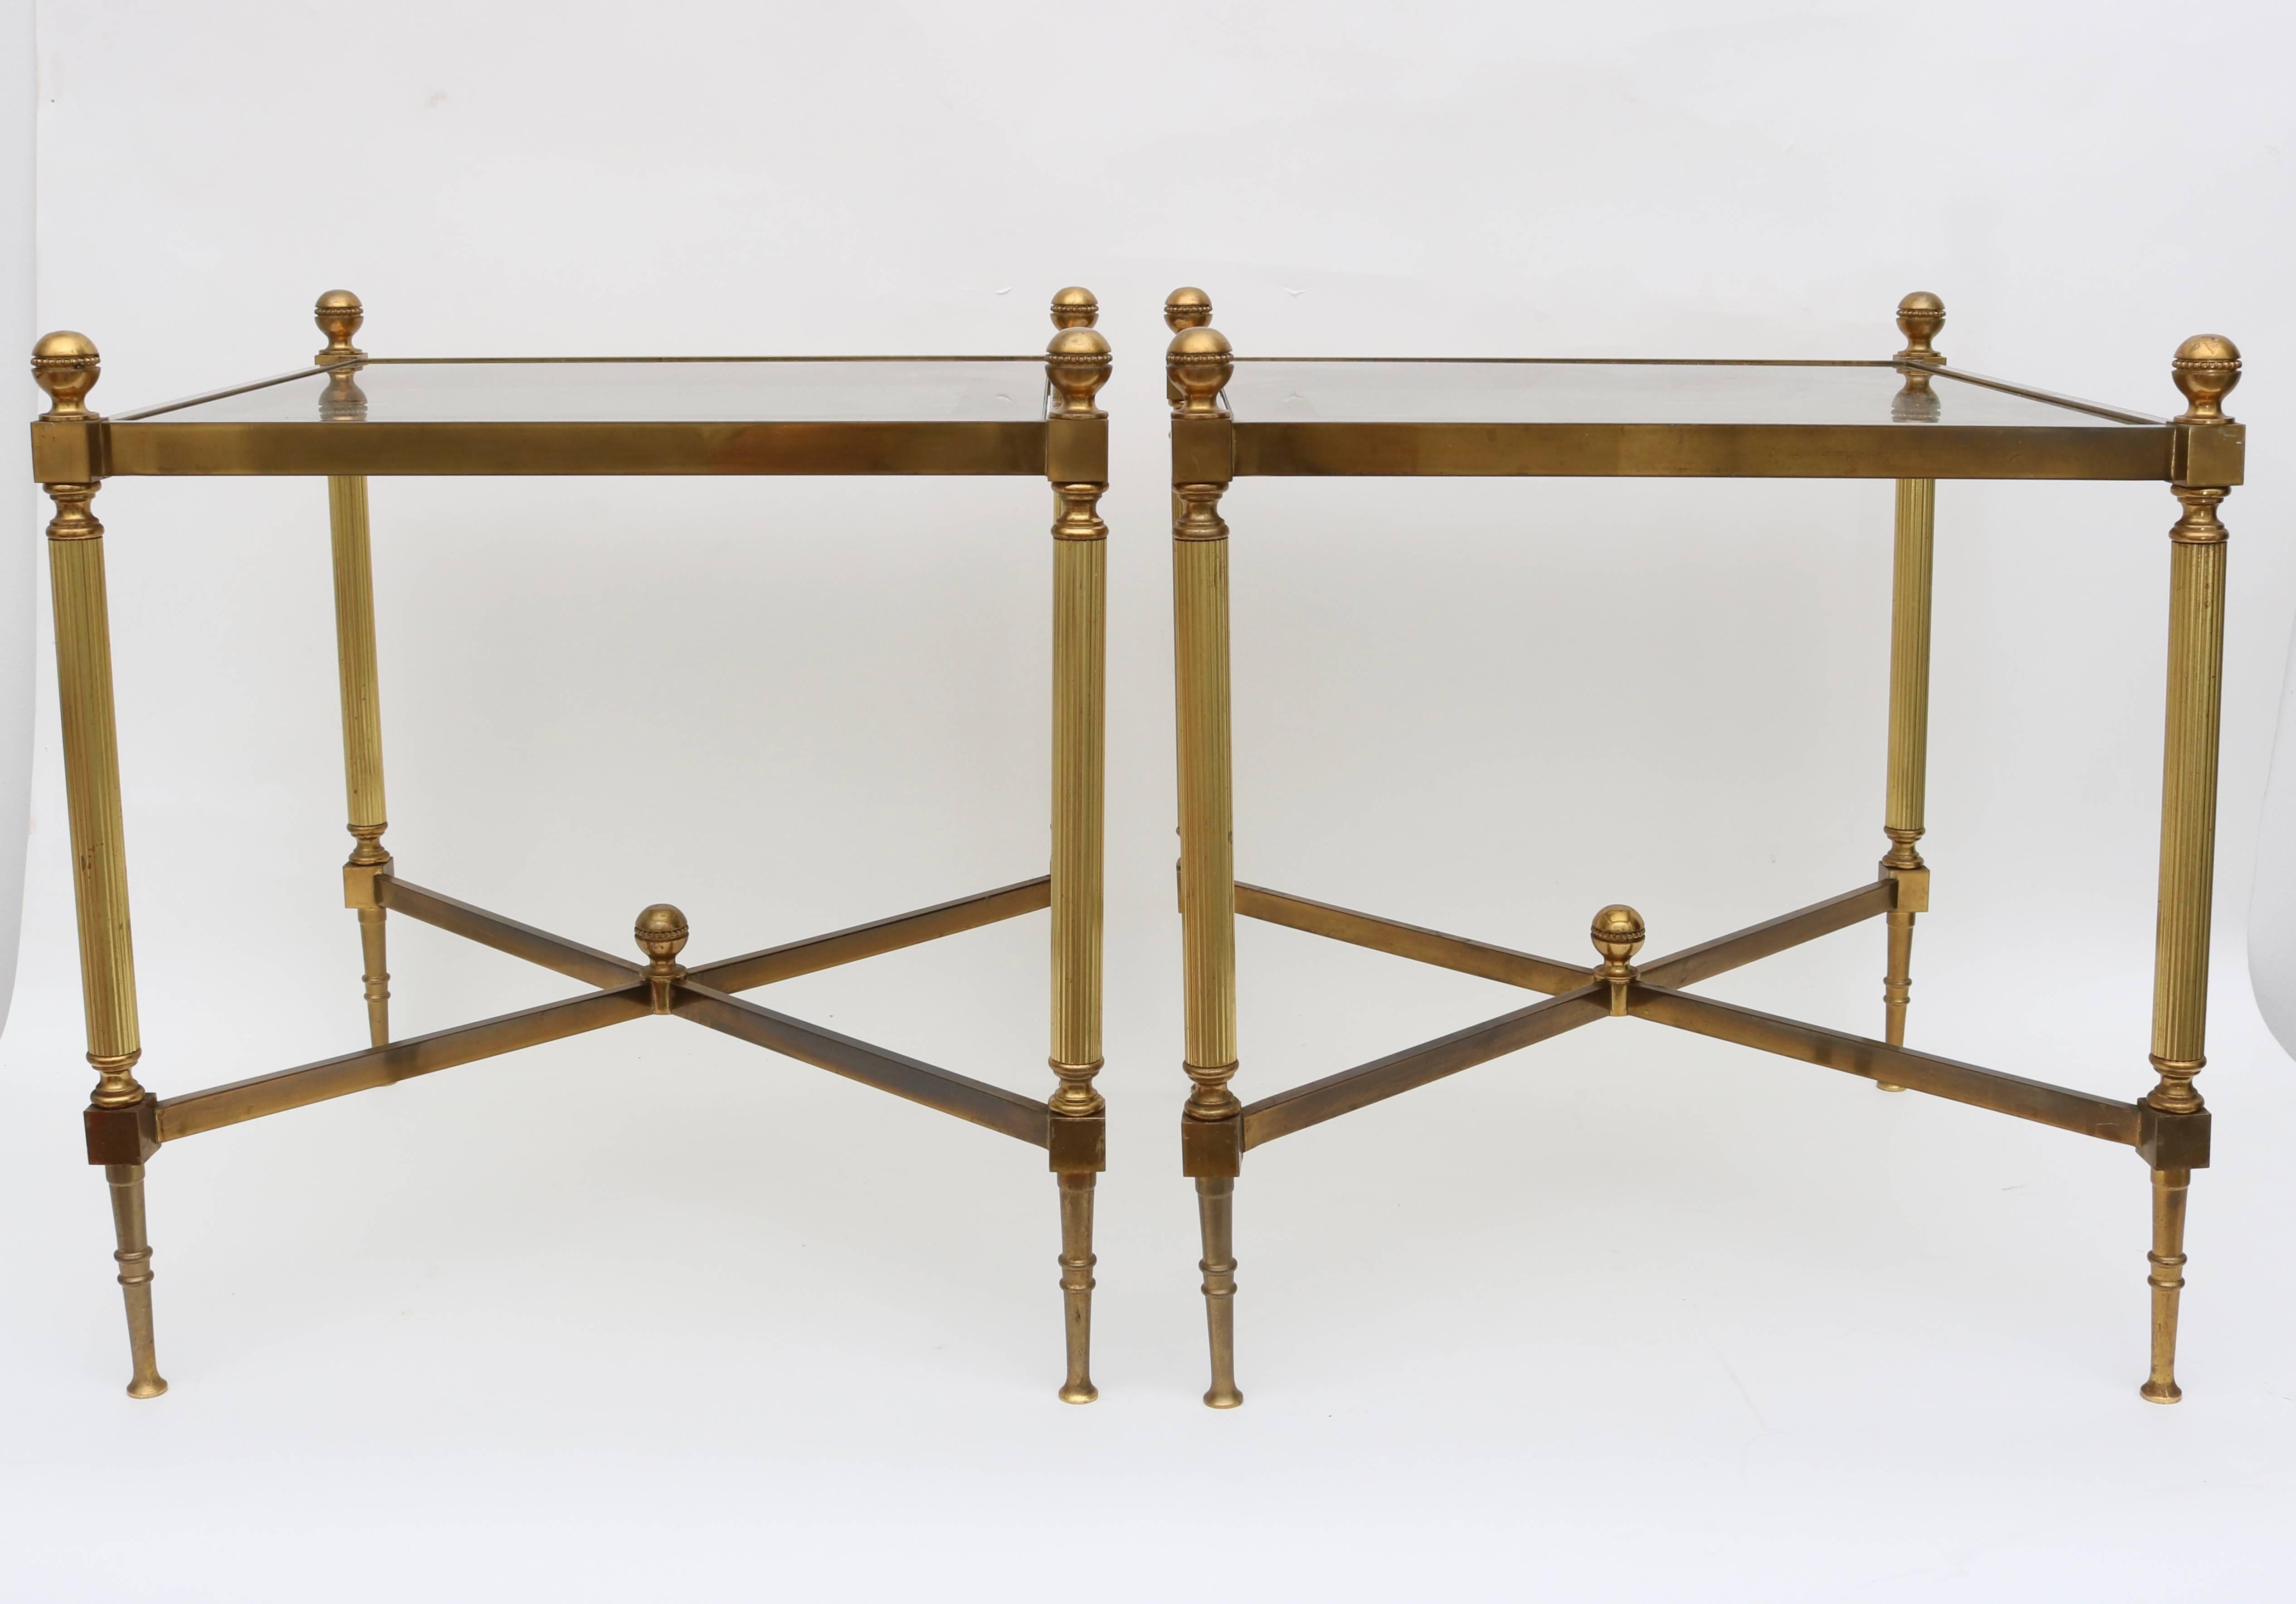 This stylish pair of Maison Jansen style tables date to the 1960s and are fabricated in brass with an X-form cross stretcher and fluted legs. The inset glass tops have a antiqued-gold painted border on the underside.

Note: Height to top of finial